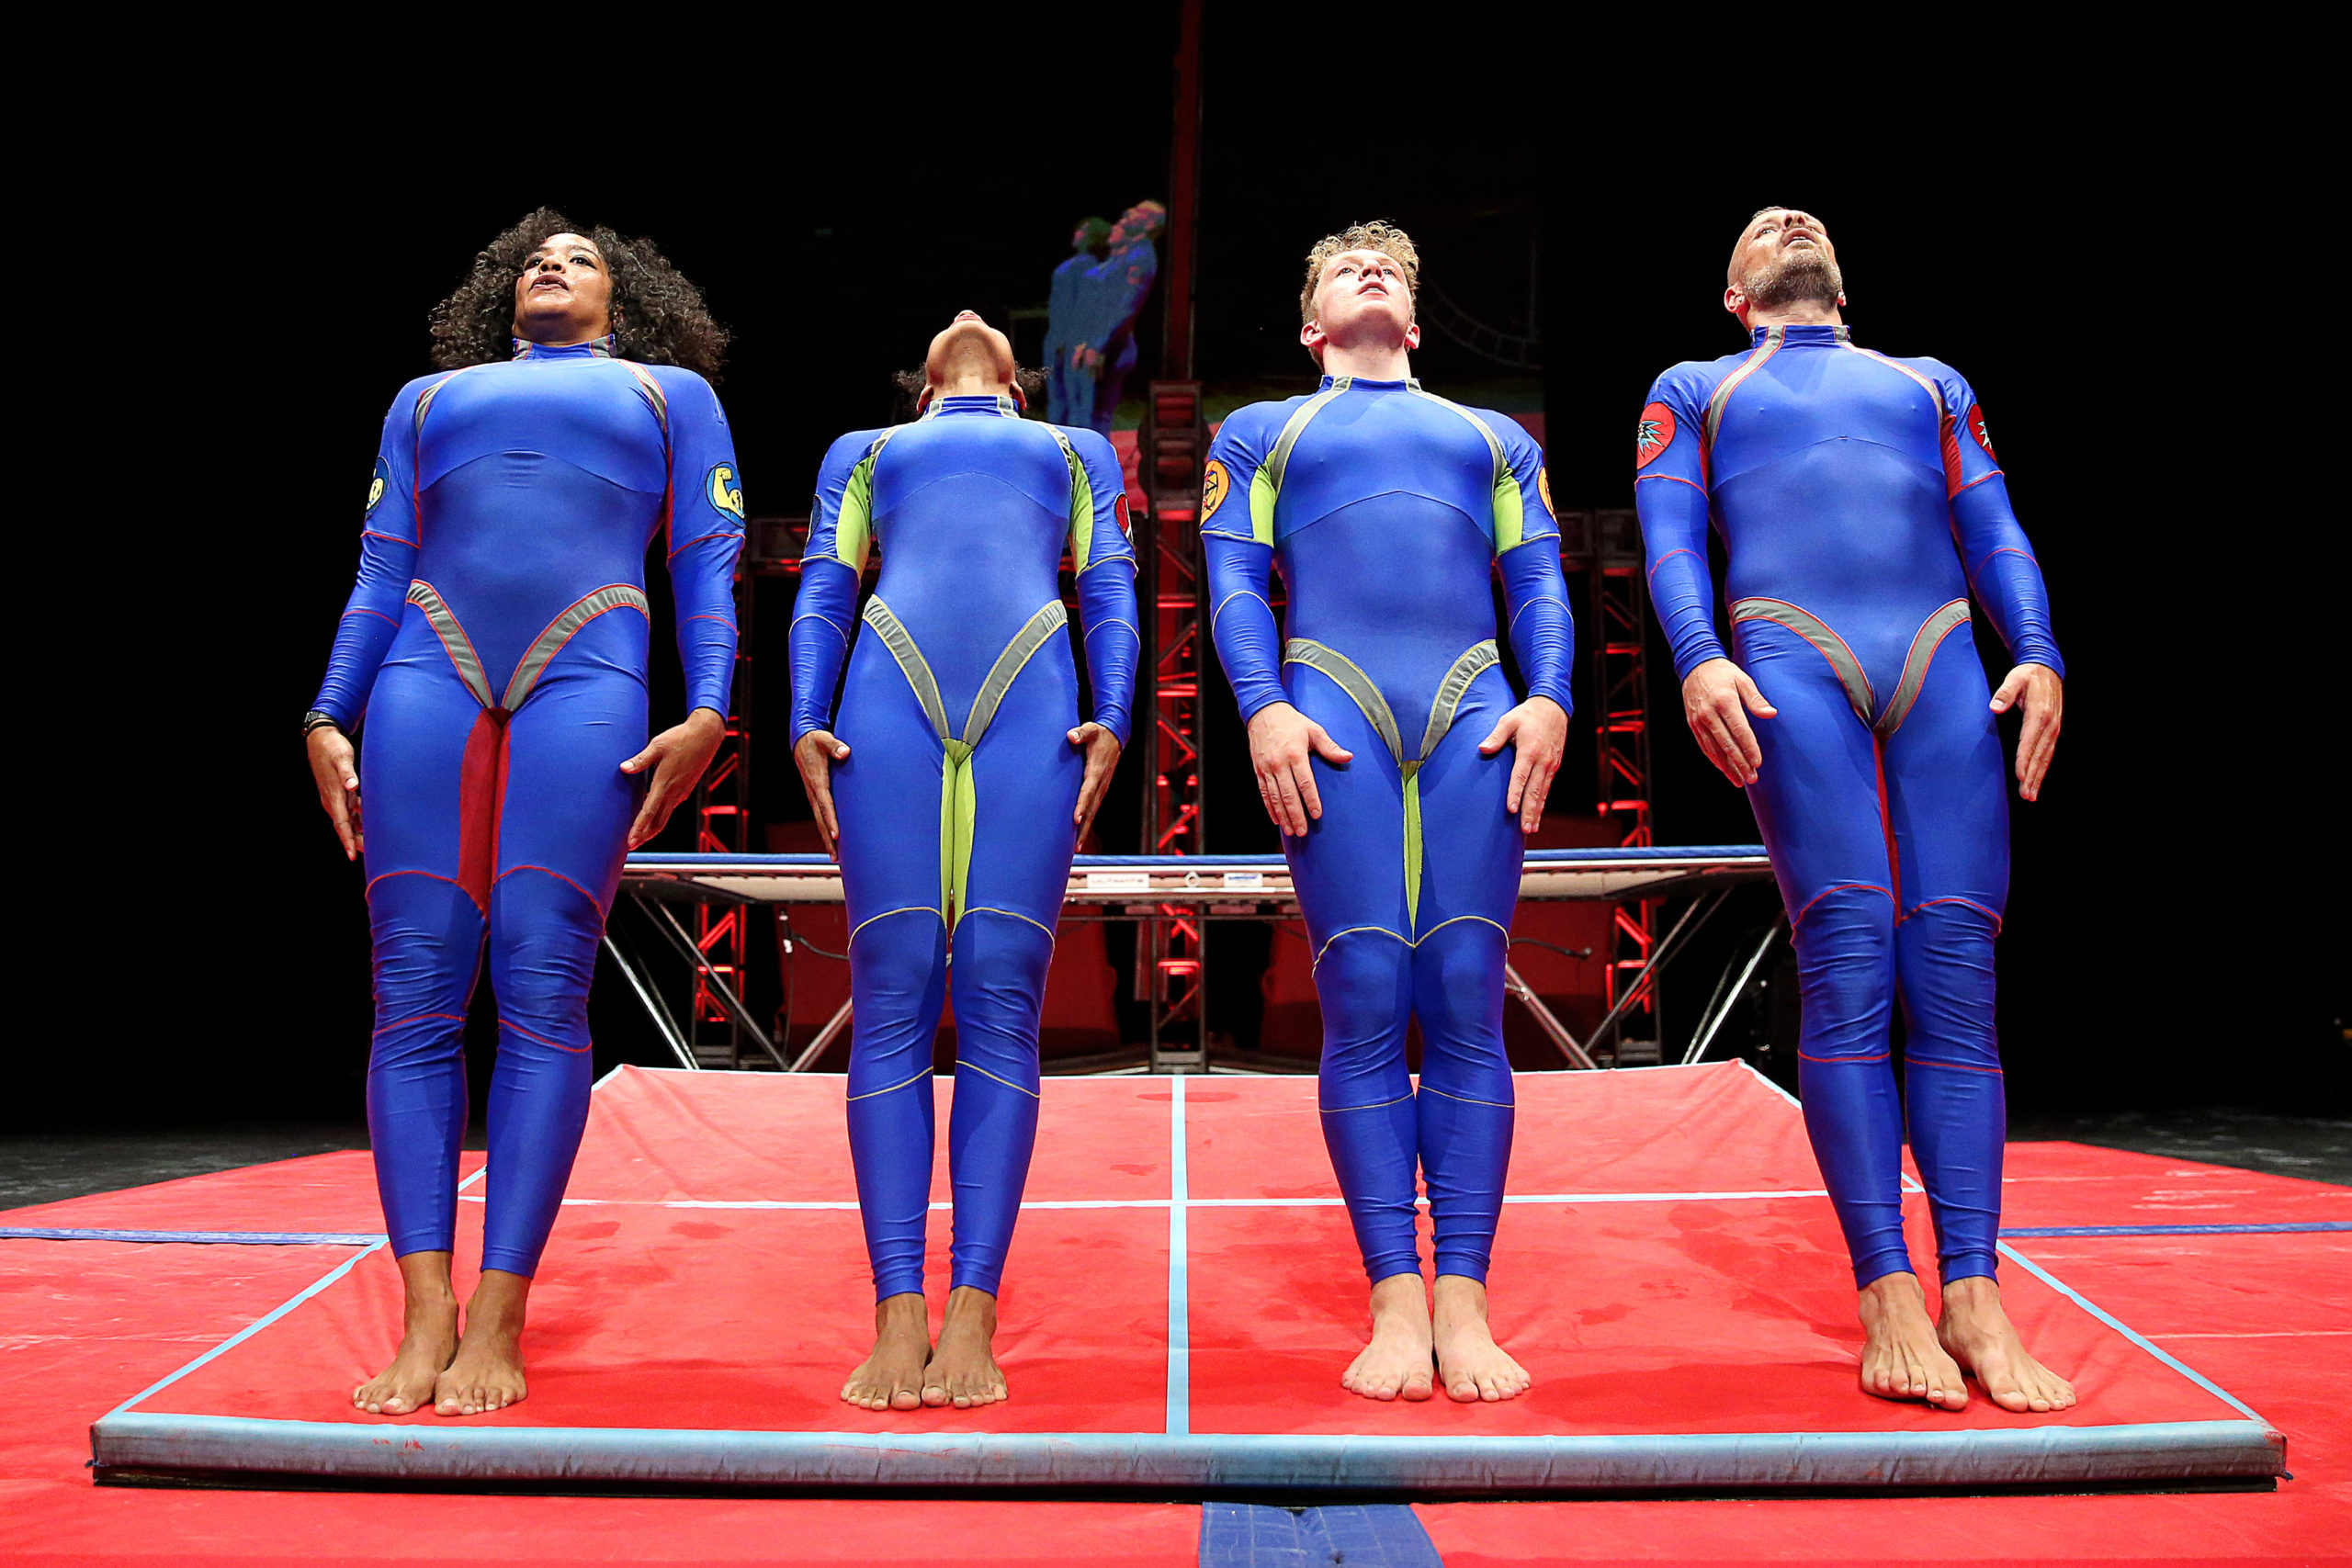 4 dancers wearing blue body suits leaning backwards